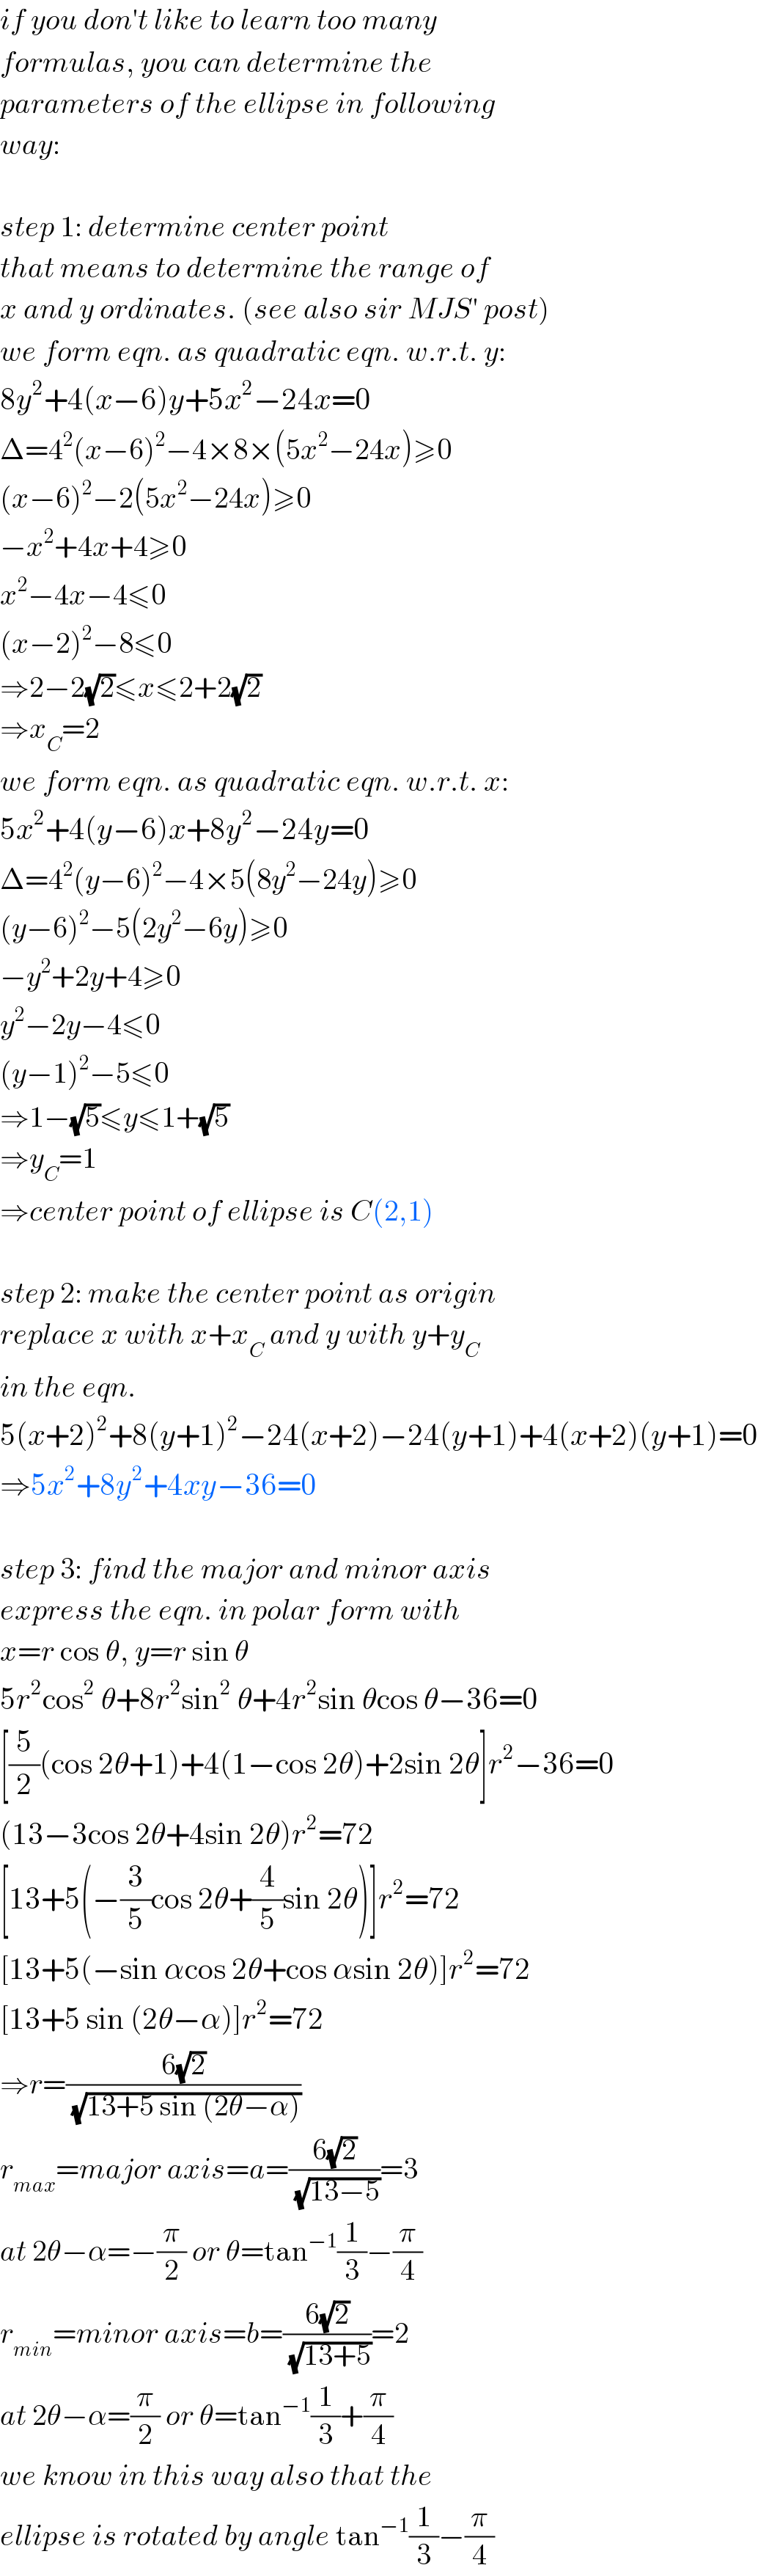 if you don′t like to learn too many  formulas, you can determine the  parameters of the ellipse in following  way:    step 1: determine center point  that means to determine the range of  x and y ordinates. (see also sir MJS′ post)  we form eqn. as quadratic eqn. w.r.t. y:  8y^2 +4(x−6)y+5x^2 −24x=0  Δ=4^2 (x−6)^2 −4×8×(5x^2 −24x)≥0  (x−6)^2 −2(5x^2 −24x)≥0  −x^2 +4x+4≥0  x^2 −4x−4≤0  (x−2)^2 −8≤0  ⇒2−2(√2)≤x≤2+2(√2)  ⇒x_C =2  we form eqn. as quadratic eqn. w.r.t. x:  5x^2 +4(y−6)x+8y^2 −24y=0  Δ=4^2 (y−6)^2 −4×5(8y^2 −24y)≥0  (y−6)^2 −5(2y^2 −6y)≥0  −y^2 +2y+4≥0  y^2 −2y−4≤0  (y−1)^2 −5≤0  ⇒1−(√5)≤y≤1+(√5)  ⇒y_C =1  ⇒center point of ellipse is C(2,1)    step 2: make the center point as origin  replace x with x+x_C  and y with y+y_C   in the eqn.  5(x+2)^2 +8(y+1)^2 −24(x+2)−24(y+1)+4(x+2)(y+1)=0  ⇒5x^2 +8y^2 +4xy−36=0    step 3: find the major and minor axis  express the eqn. in polar form with  x=r cos θ, y=r sin θ  5r^2 cos^2  θ+8r^2 sin^2  θ+4r^2 sin θcos θ−36=0  [(5/2)(cos 2θ+1)+4(1−cos 2θ)+2sin 2θ]r^2 −36=0  (13−3cos 2θ+4sin 2θ)r^2 =72  [13+5(−(3/5)cos 2θ+(4/5)sin 2θ)]r^2 =72  [13+5(−sin αcos 2θ+cos αsin 2θ)]r^2 =72  [13+5 sin (2θ−α)]r^2 =72  ⇒r=((6(√2))/(√(13+5 sin (2θ−α))))  r_(max) =major axis=a=((6(√2))/(√(13−5)))=3  at 2θ−α=−(π/2) or θ=tan^(−1) (1/3)−(π/4)  r_(min) =minor axis=b=((6(√2))/(√(13+5)))=2  at 2θ−α=(π/2) or θ=tan^(−1) (1/3)+(π/4)  we know in this way also that the  ellipse is rotated by angle tan^(−1) (1/3)−(π/4)  